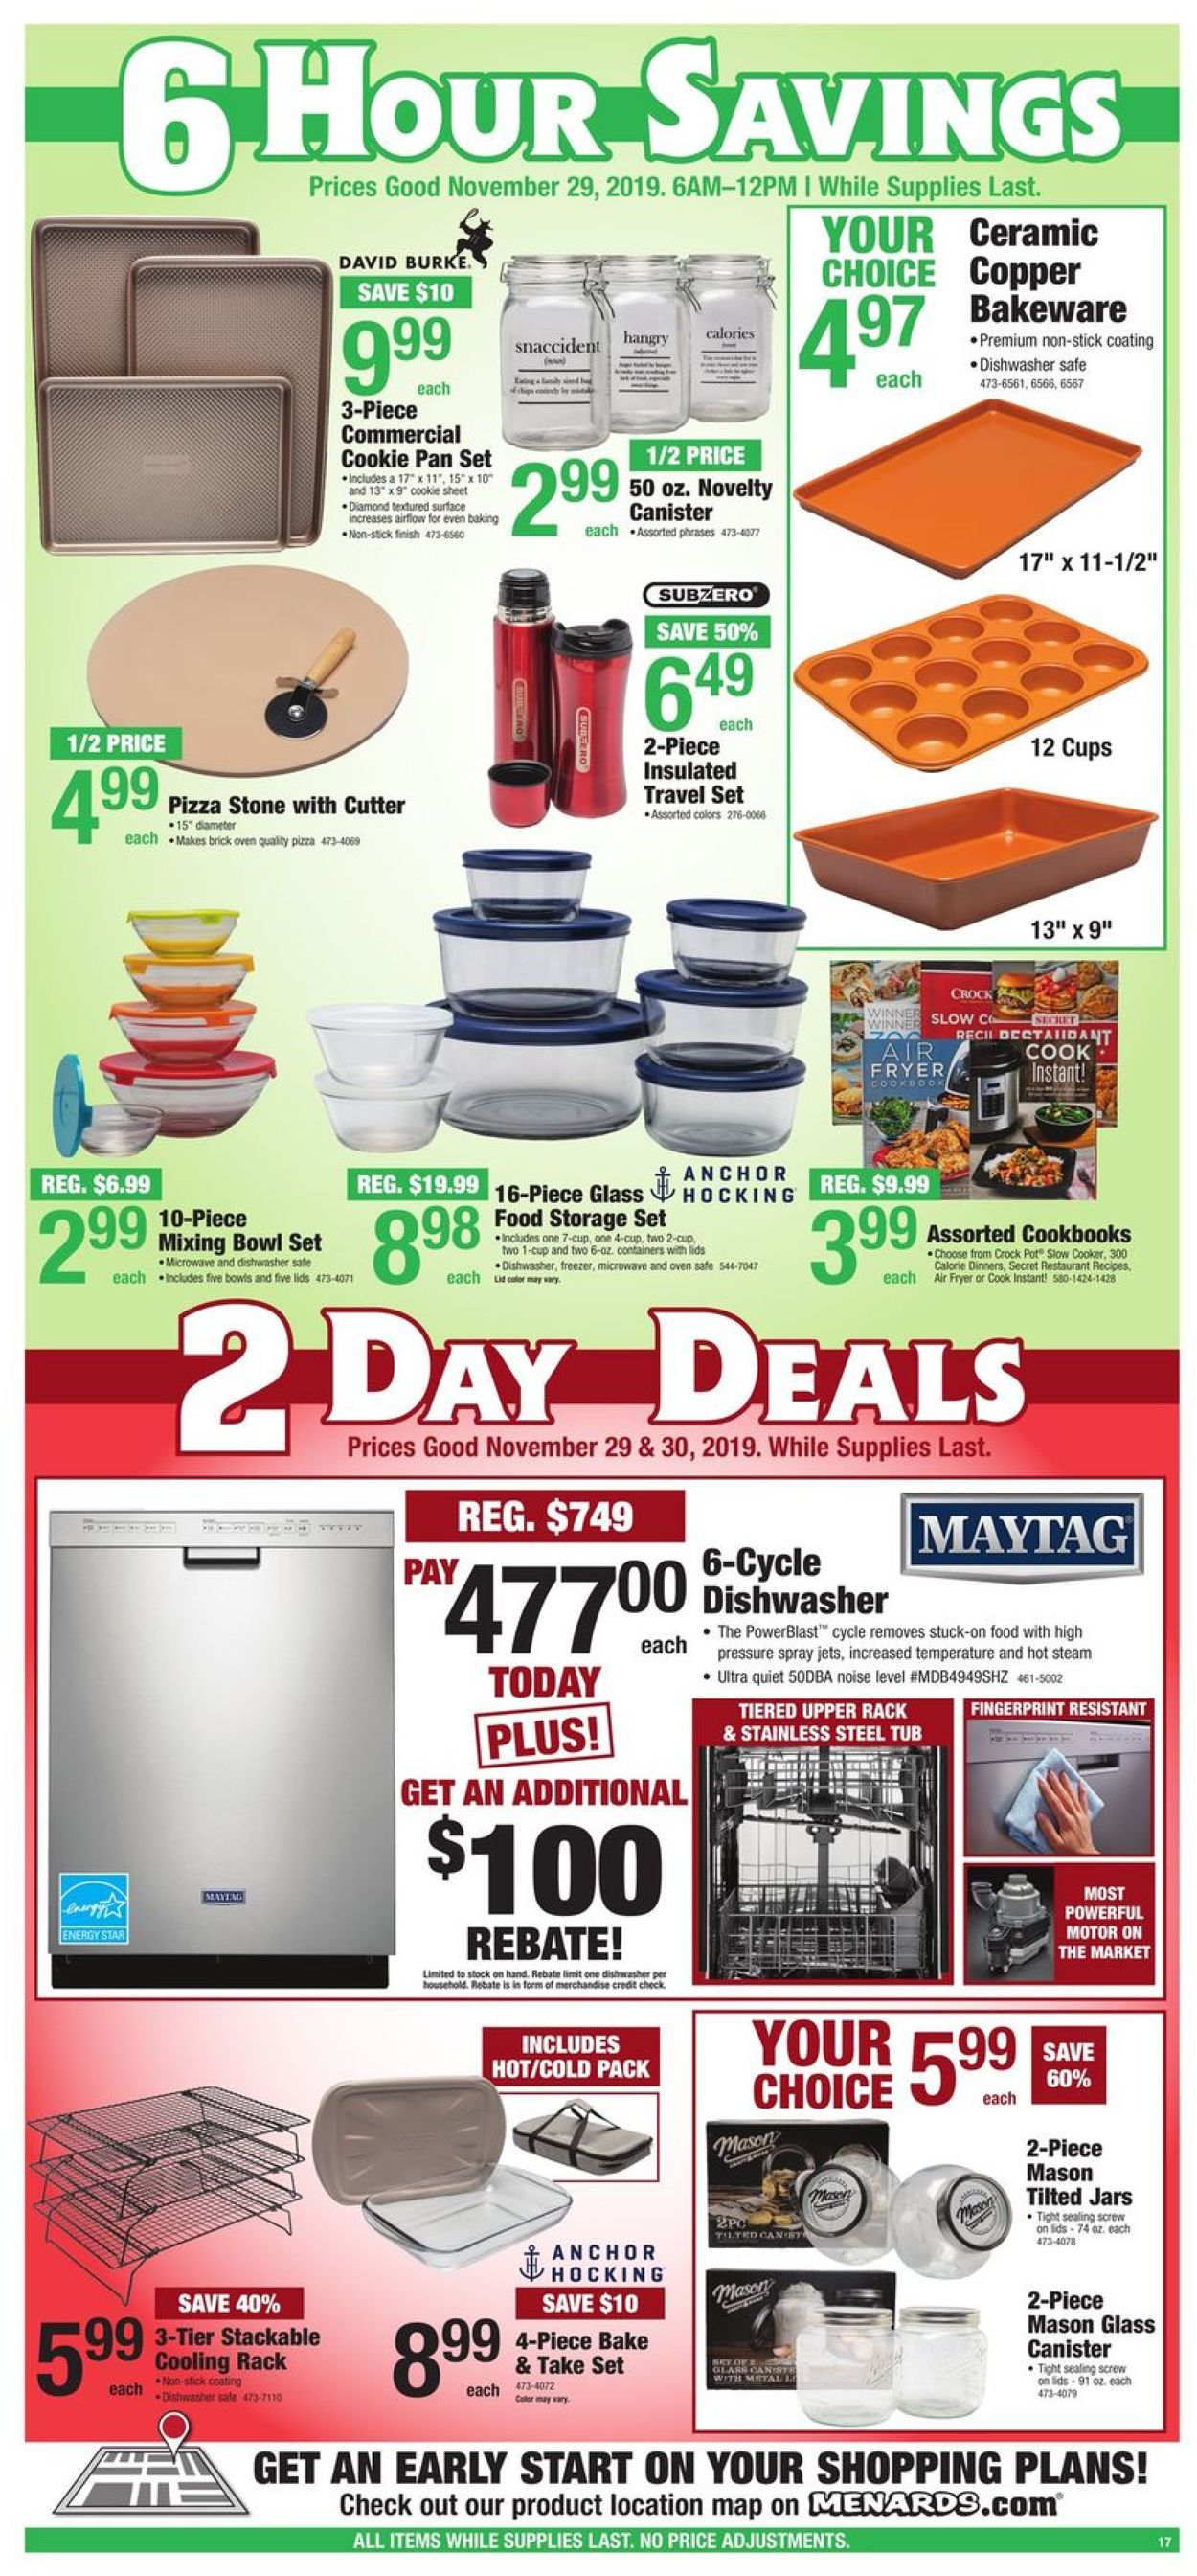 Menards - Black Friday Sale 2019 Current weekly ad 11/29 - 11/30/2019 [18] - 0